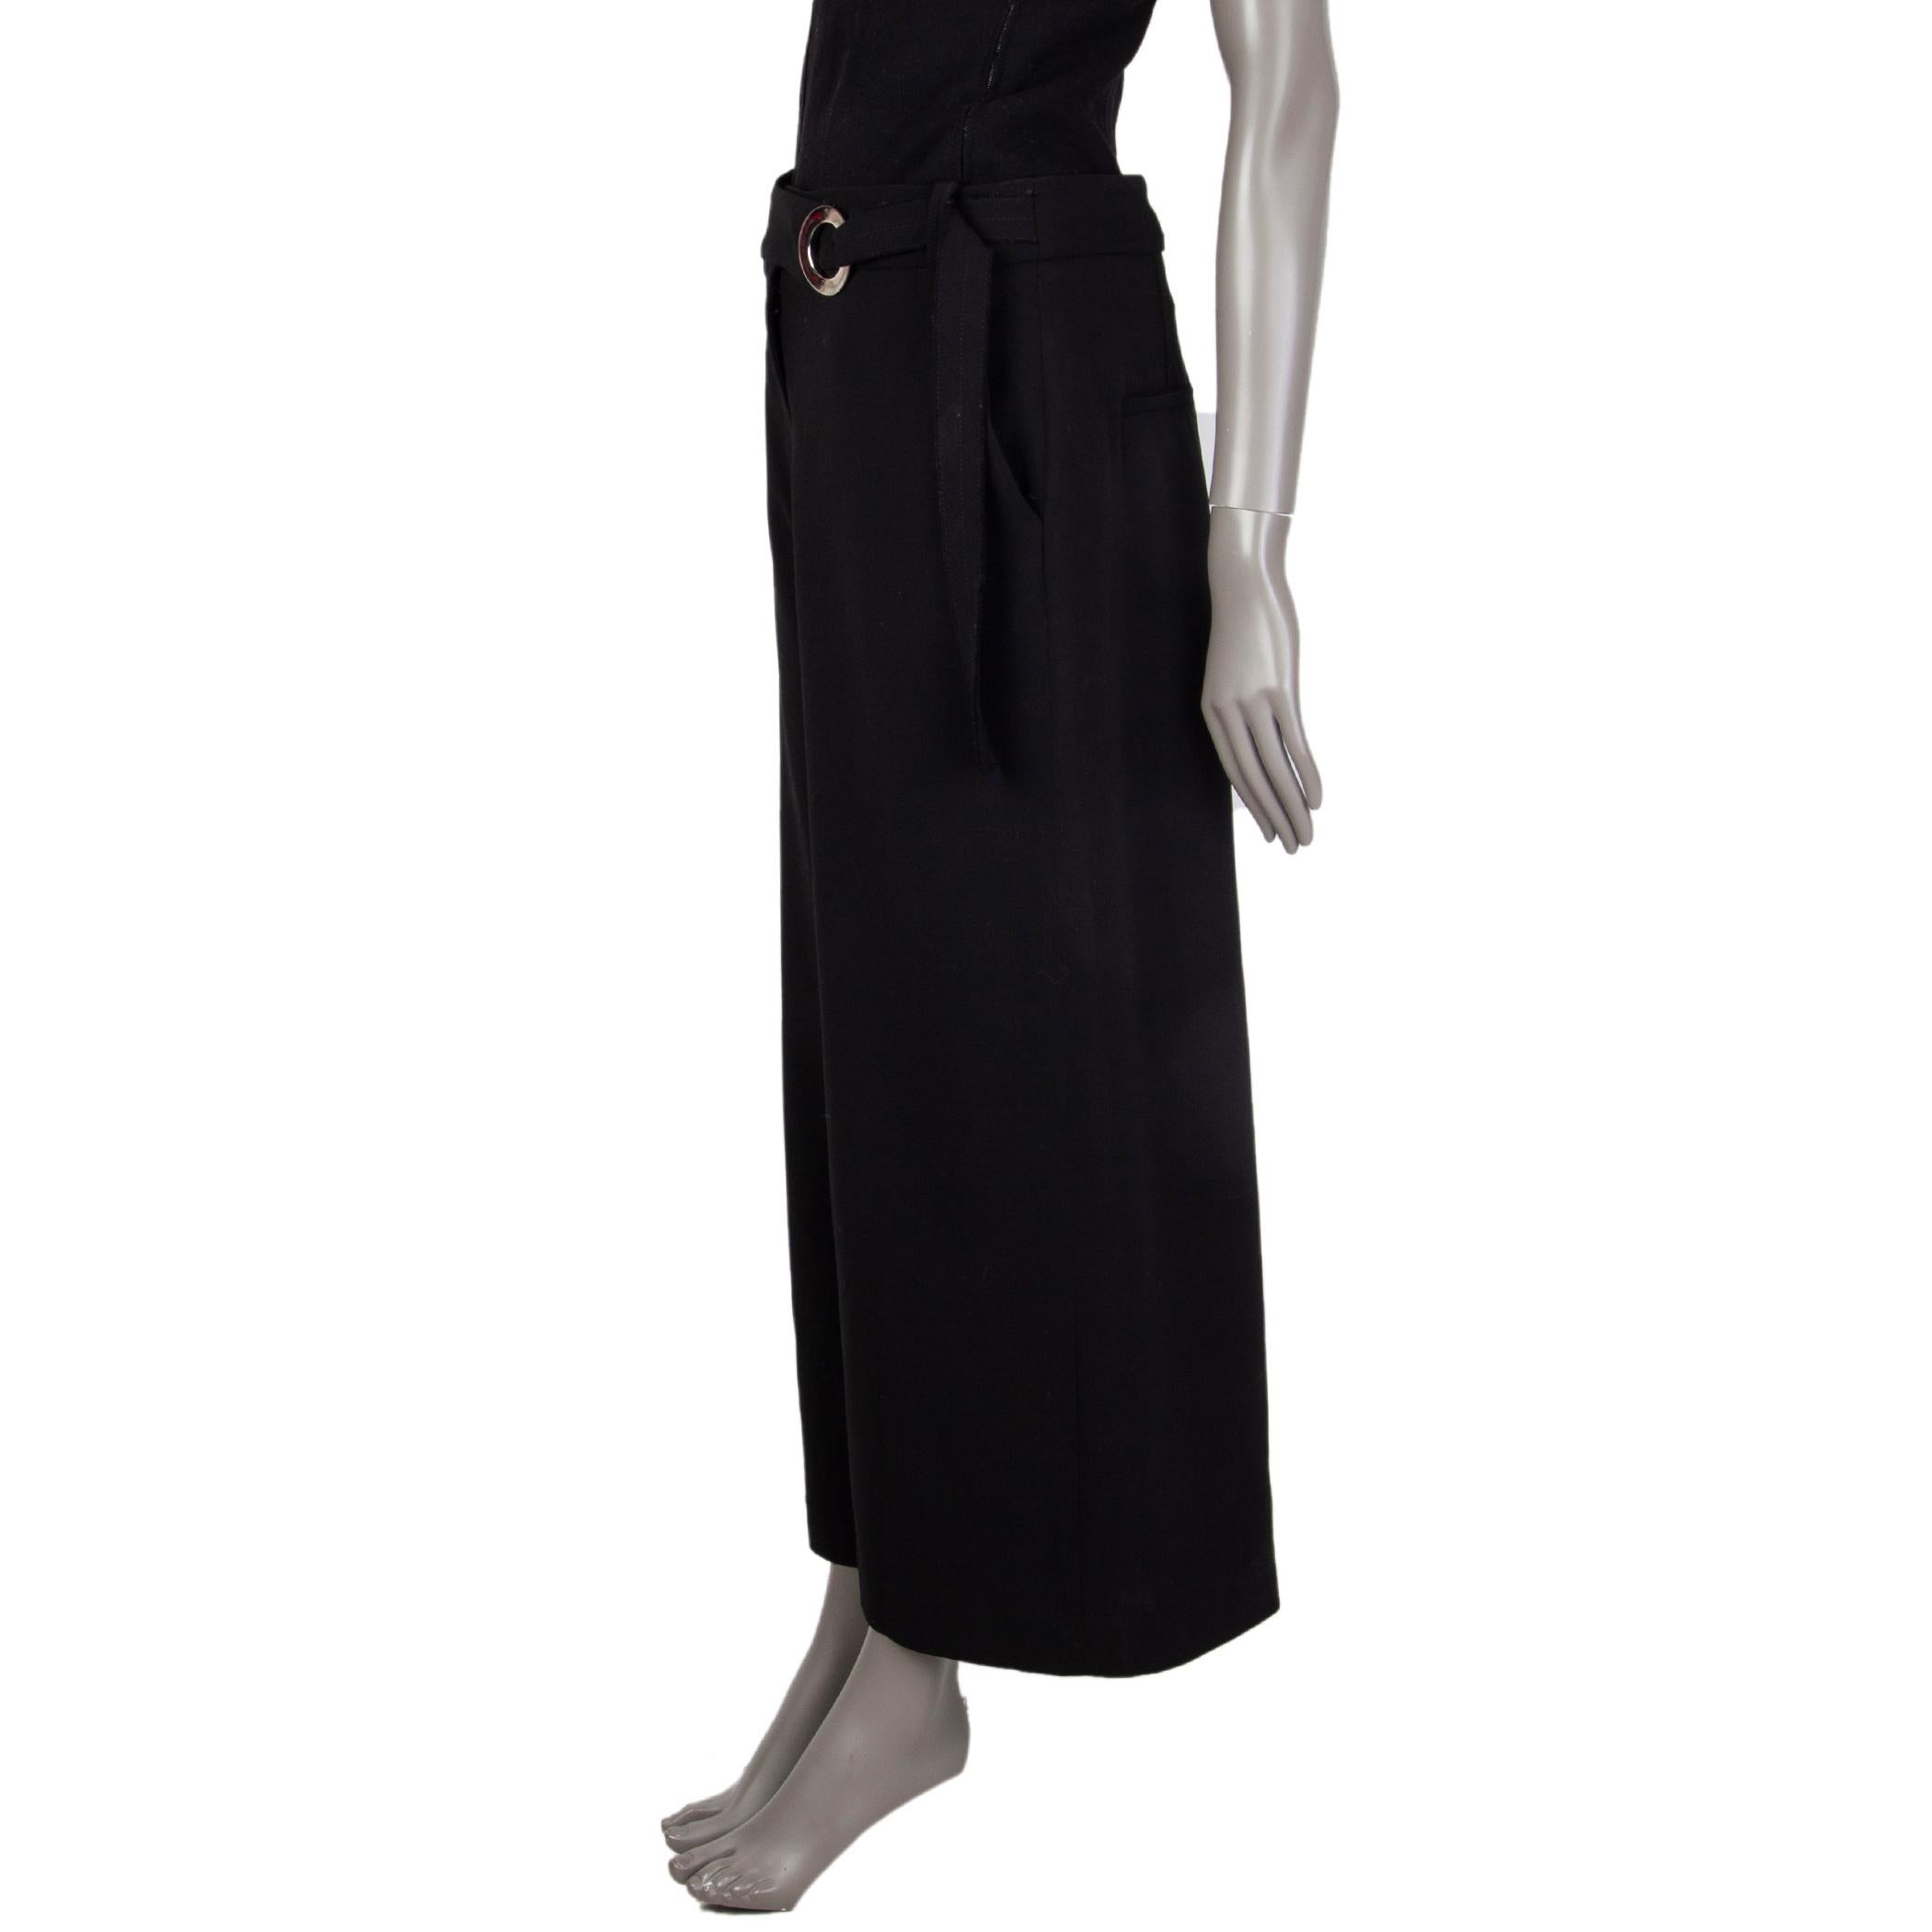 100% authentic Proenza Schouler loop-buckle wide pants in black wool (96%) and elastane (4%) with two decorative pockets on the back. Has two side slit pockets. Closes on the front with a concealed zipper. Unlined. Have been worn and is in excellent